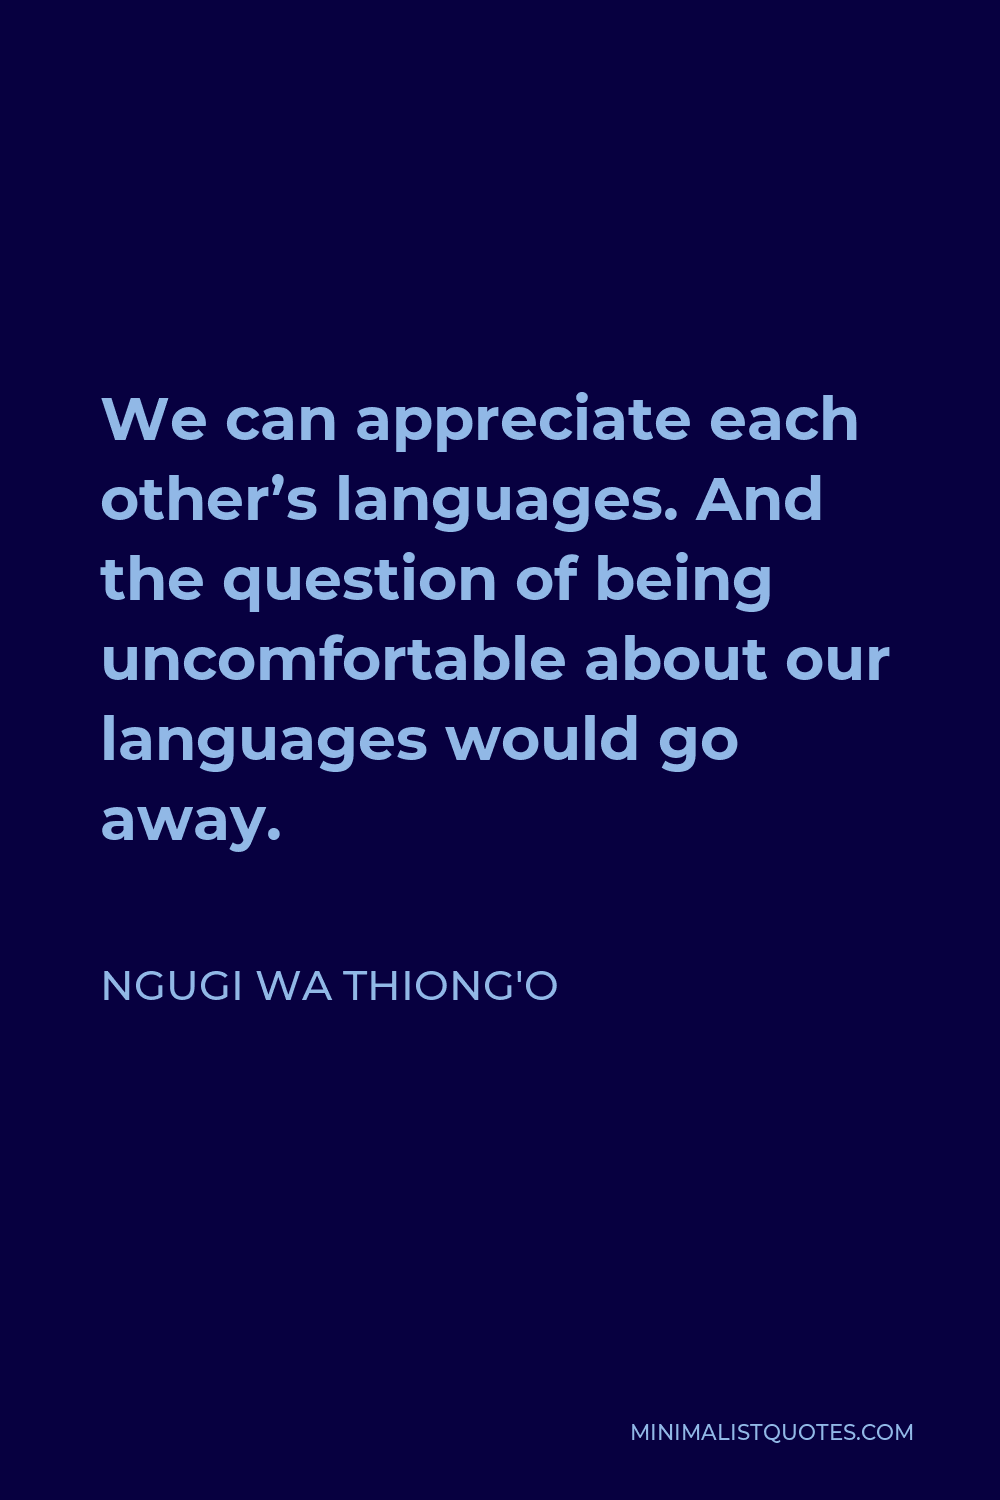 Ngugi wa Thiong'o Quote - We can appreciate each other’s languages. And the question of being uncomfortable about our languages would go away.